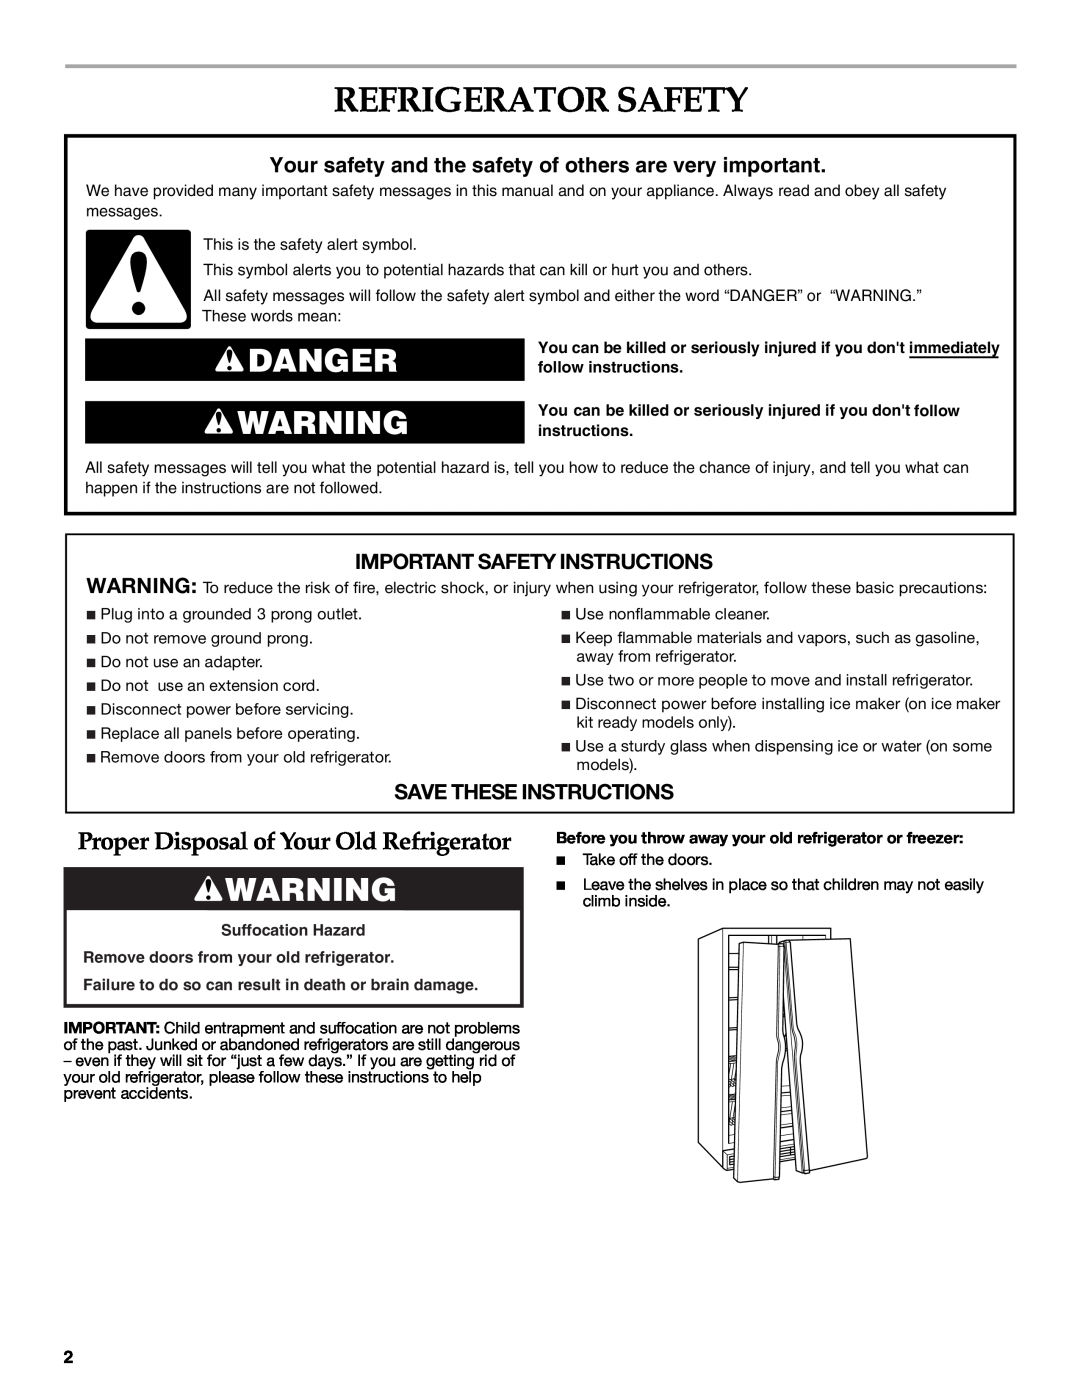 KitchenAid KSCS25INSS00 Refrigerator Safety, Danger, Proper Disposal of Your Old Refrigerator, Save These Instructions 